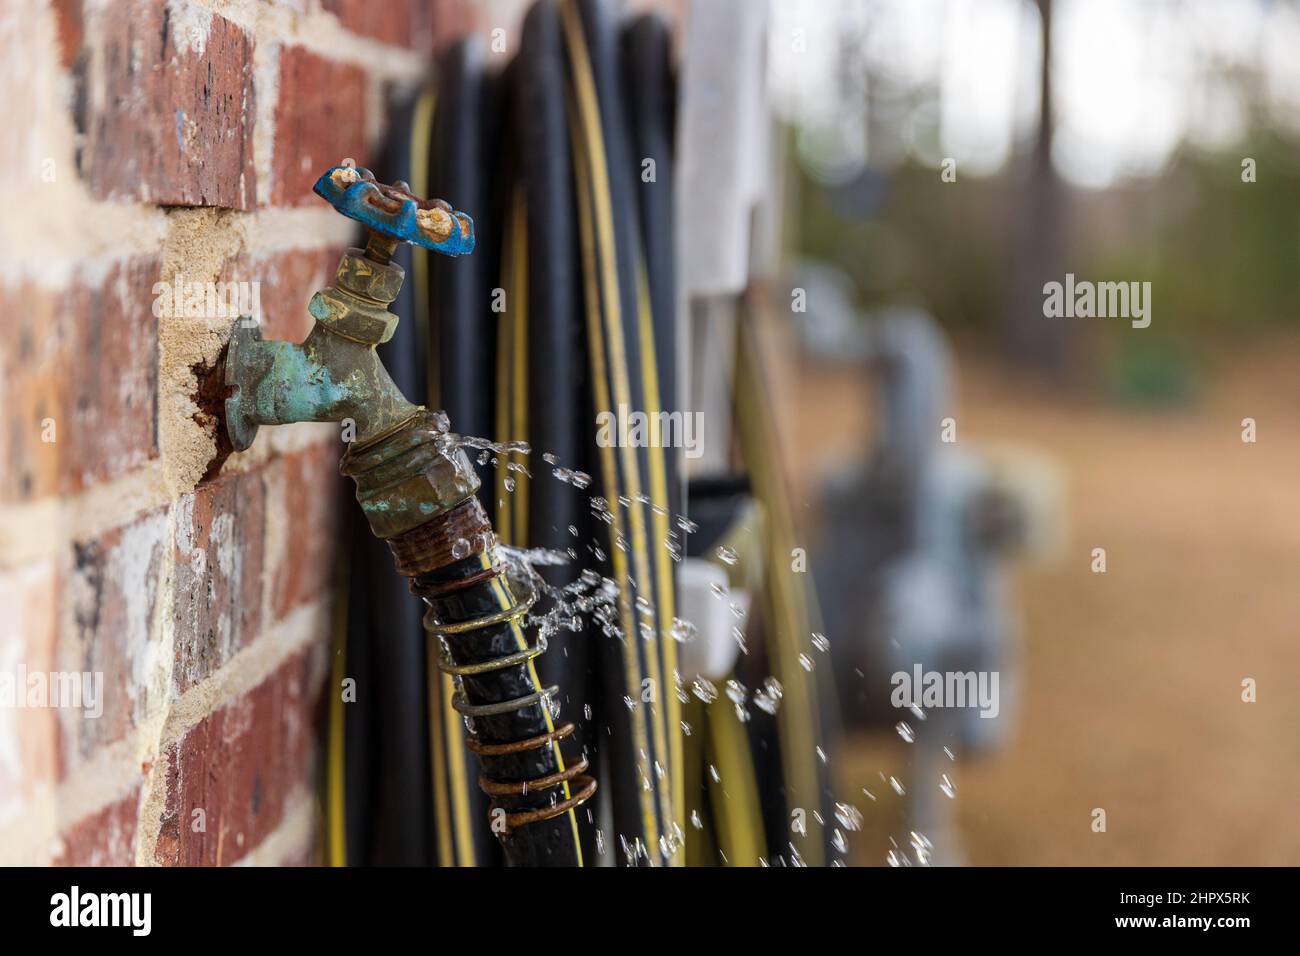 Water leaking from hose attached to faucet Stock Photo